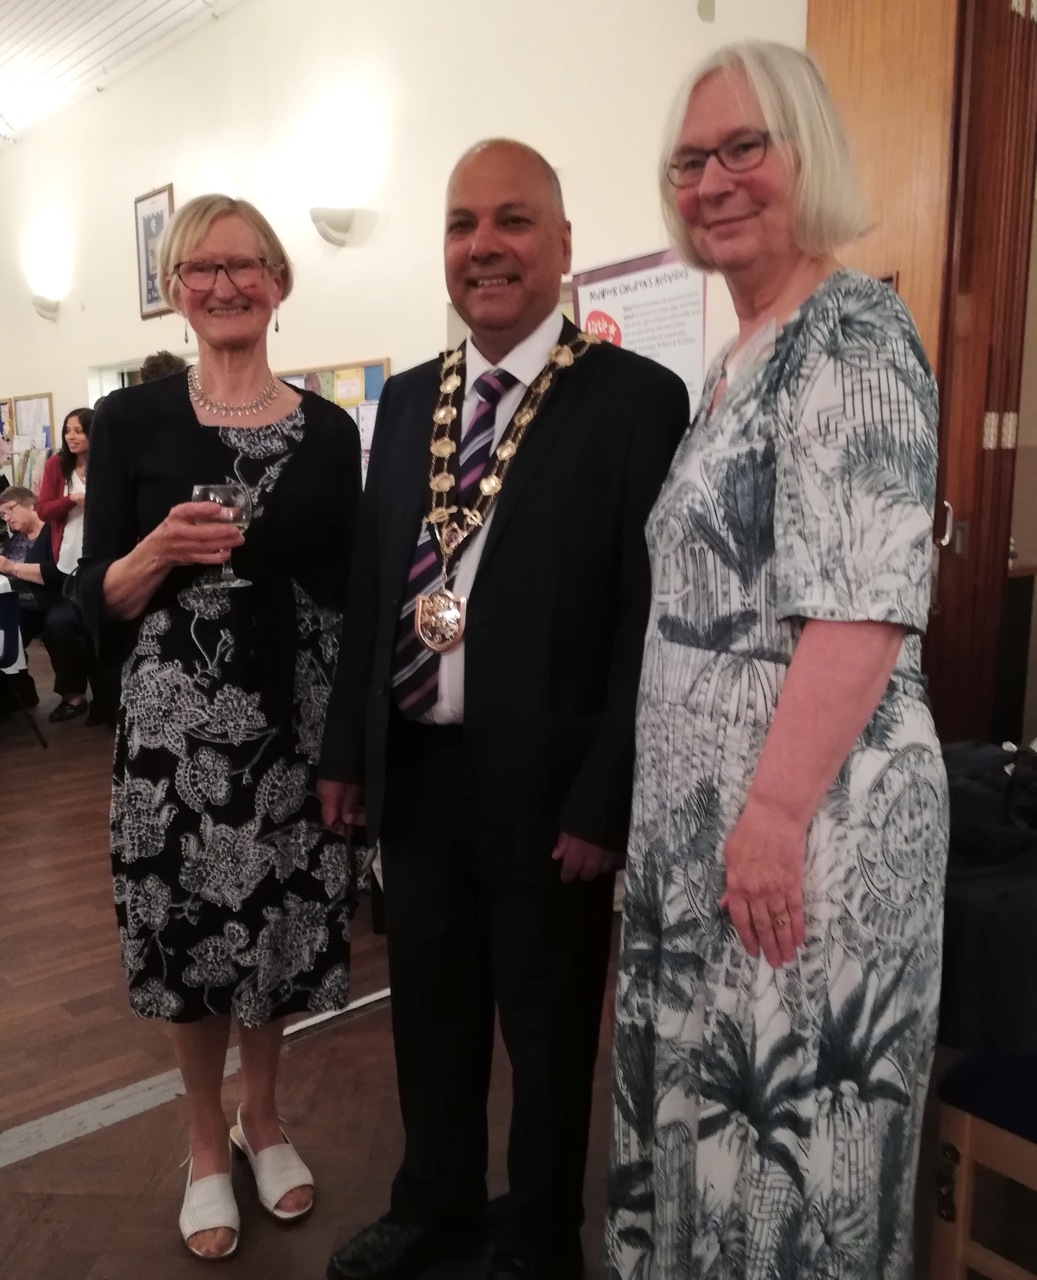 Eastleigh’s Mayor Councillor Darshan Mann with Tricia Urquhart and Sue Moll.